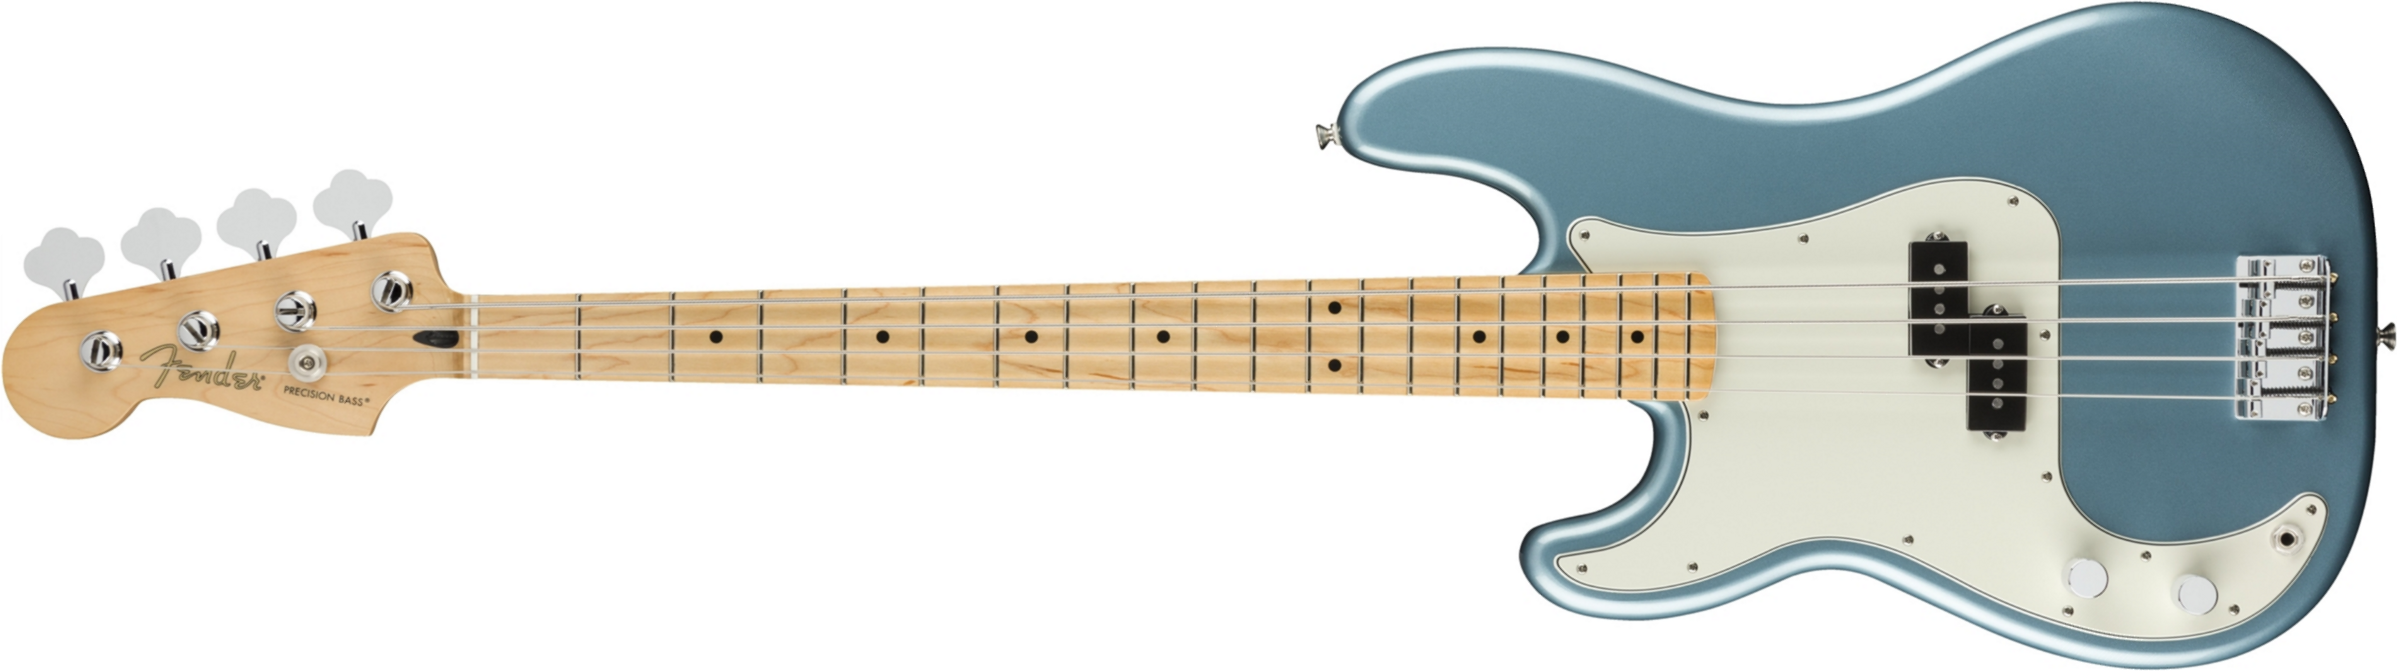 Fender Precision Bass Player Lh Gaucher Mex Mn - Tidepool - Basse Électrique Solid Body - Main picture